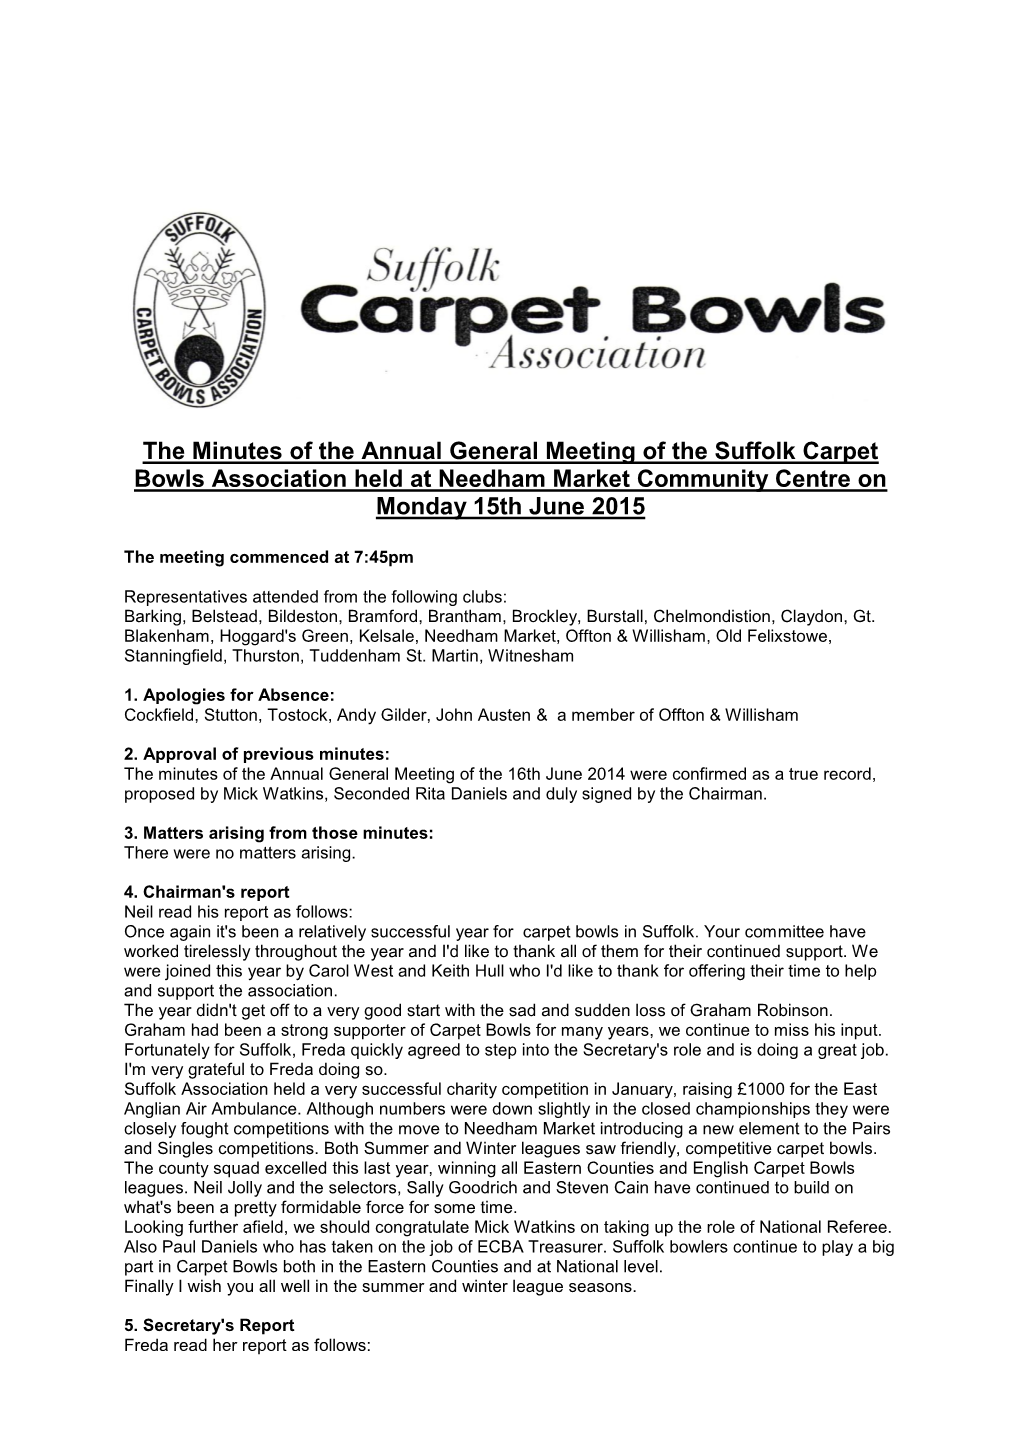 The Minutes of the Annual General Meeting of the Suffolk Carpet Bowls Association Held at Needham Market Community Centre on Monday 15Th June 2015